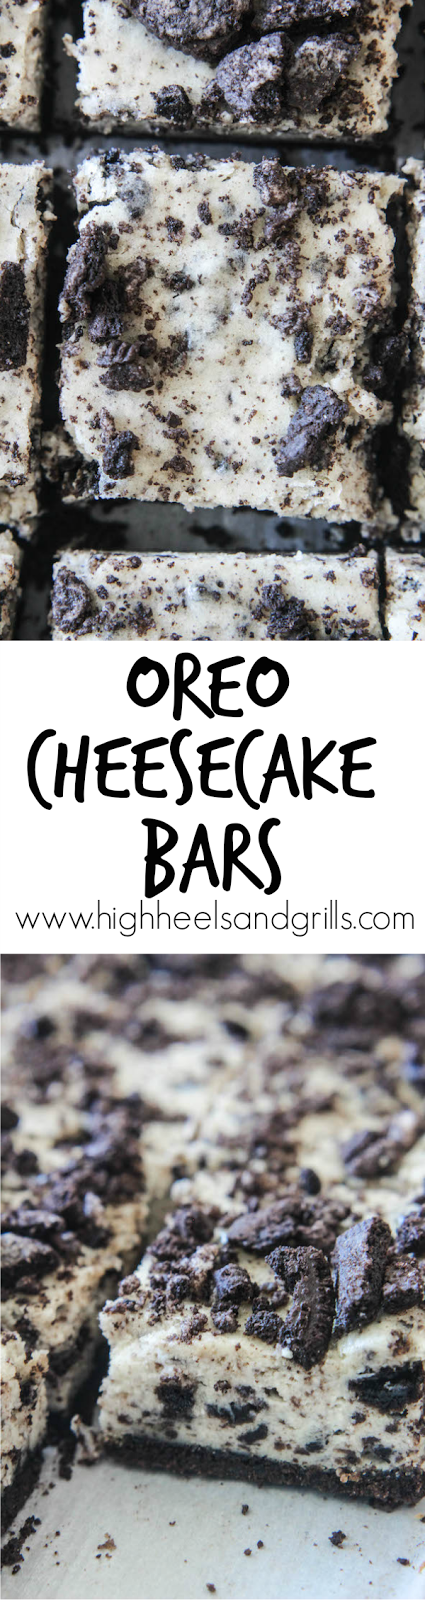 Intimidated by making cheesecake? Start with these Oreo Cheesecake Bars. They’re such an easy dessert! www